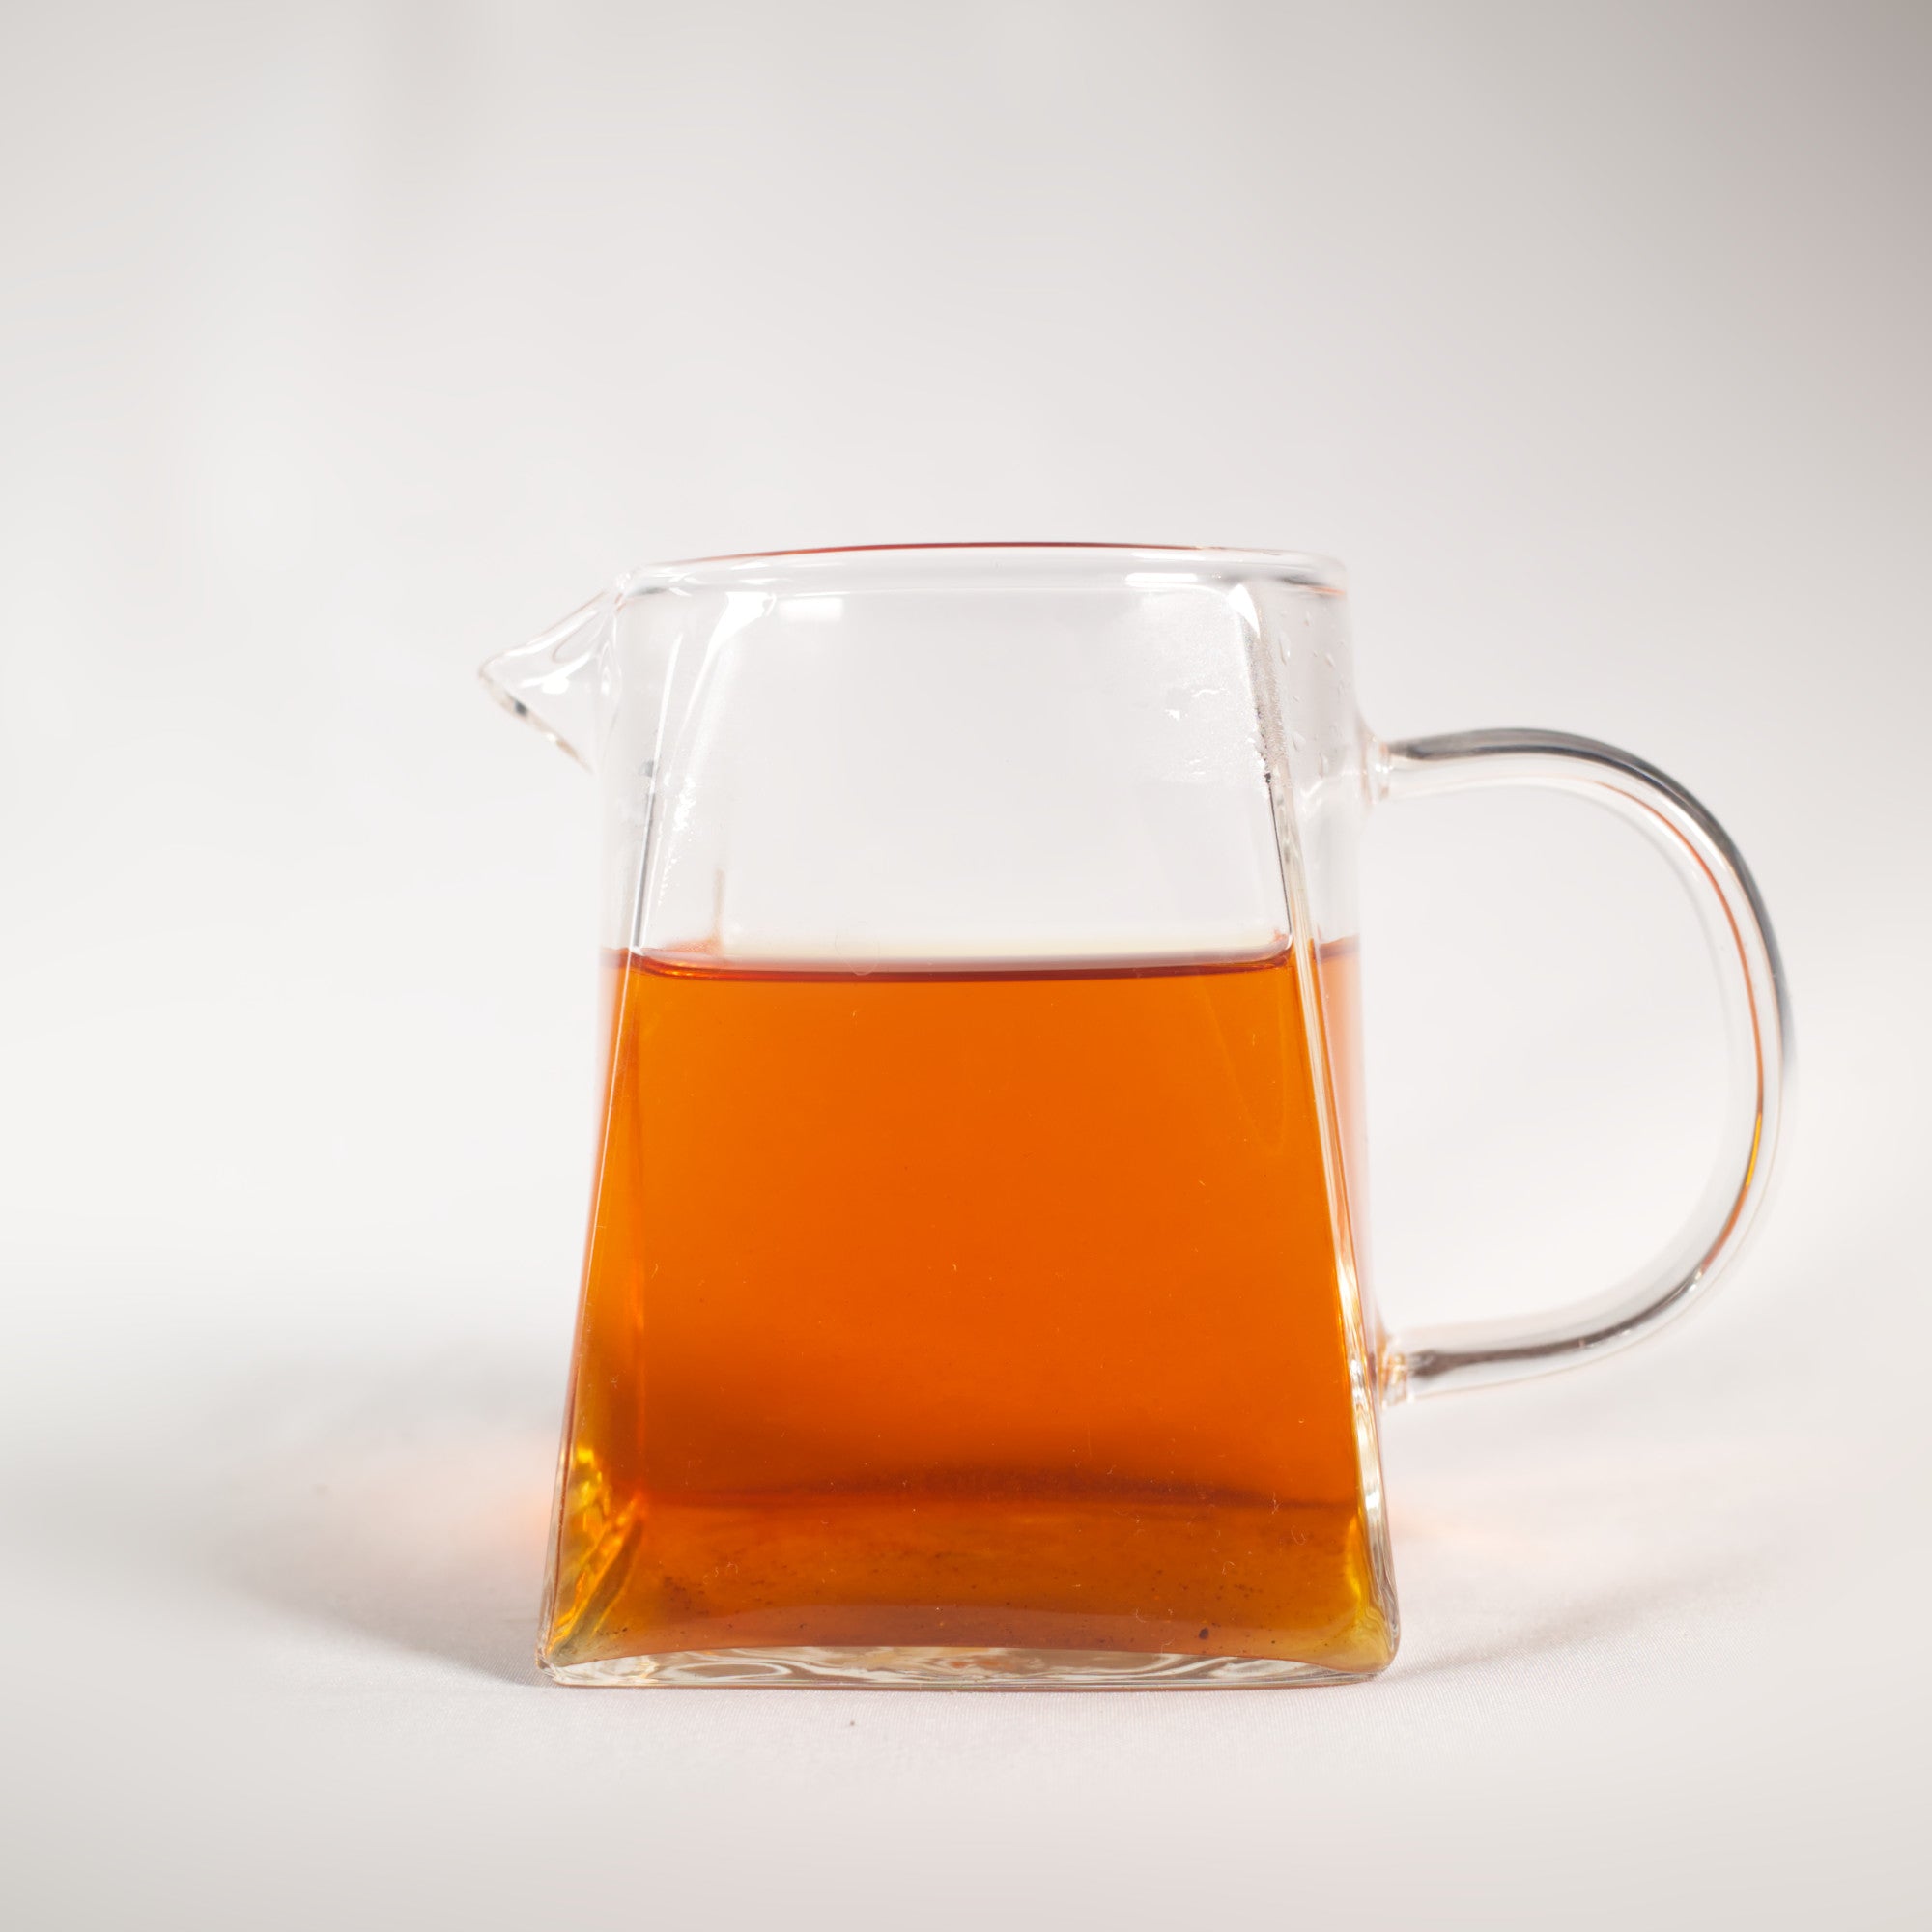 Small Glass Pitcher Lid Hot Liquid Pitcher Measuring Pitcher Acrylic Pitcher  Cold Tea Kettle